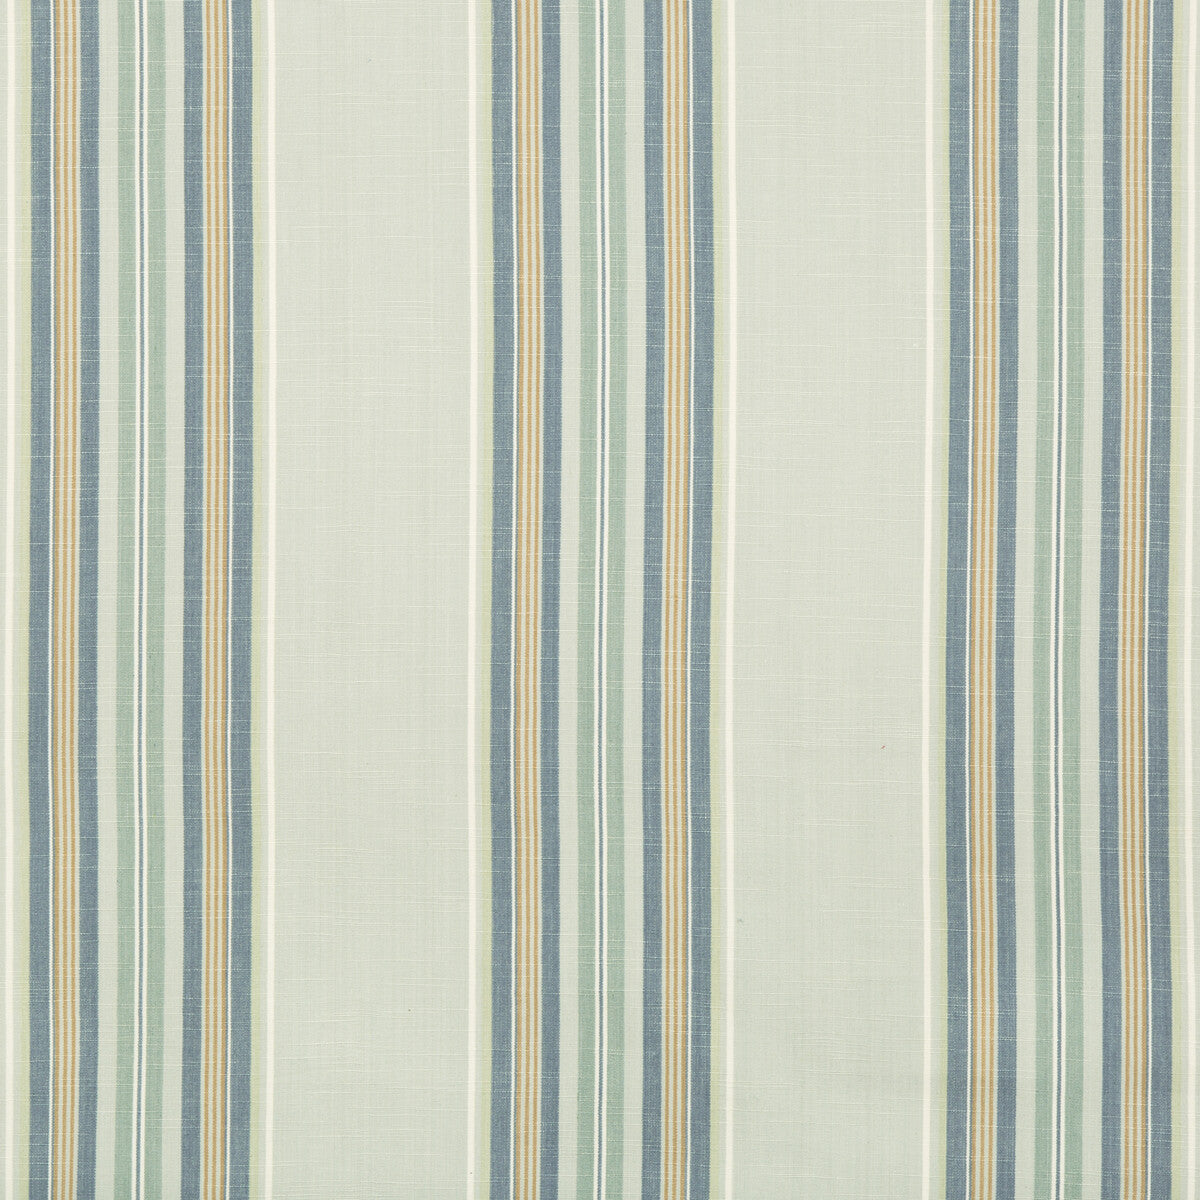 Verdon Stripe fabric in sea/blue color - pattern 8017101.135.0 - by Brunschwig &amp; Fils in the Durance collection